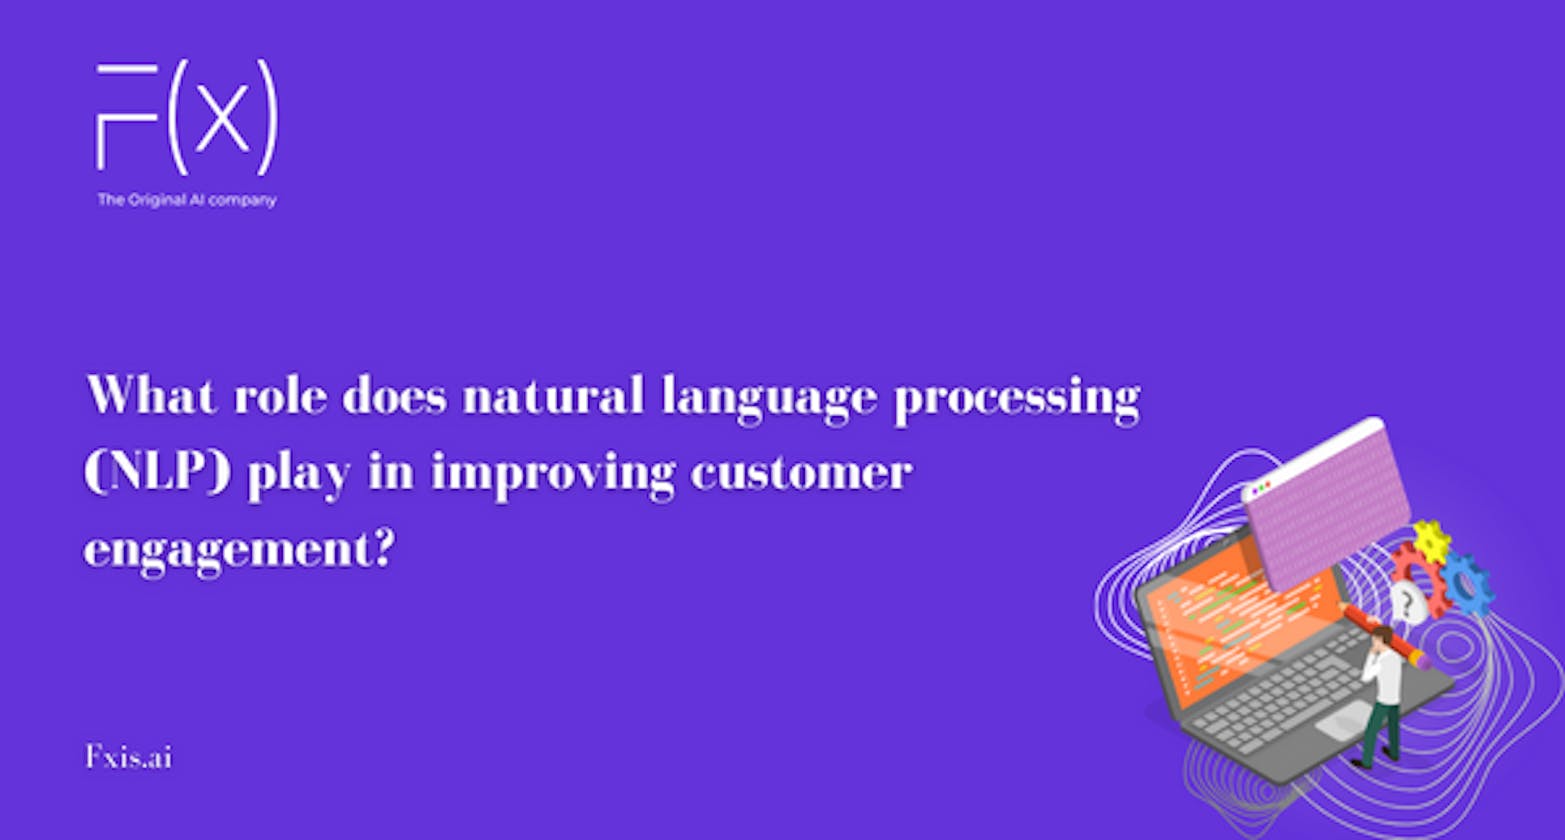 What role does natural language processing (NLP) play in improving customer engagement?